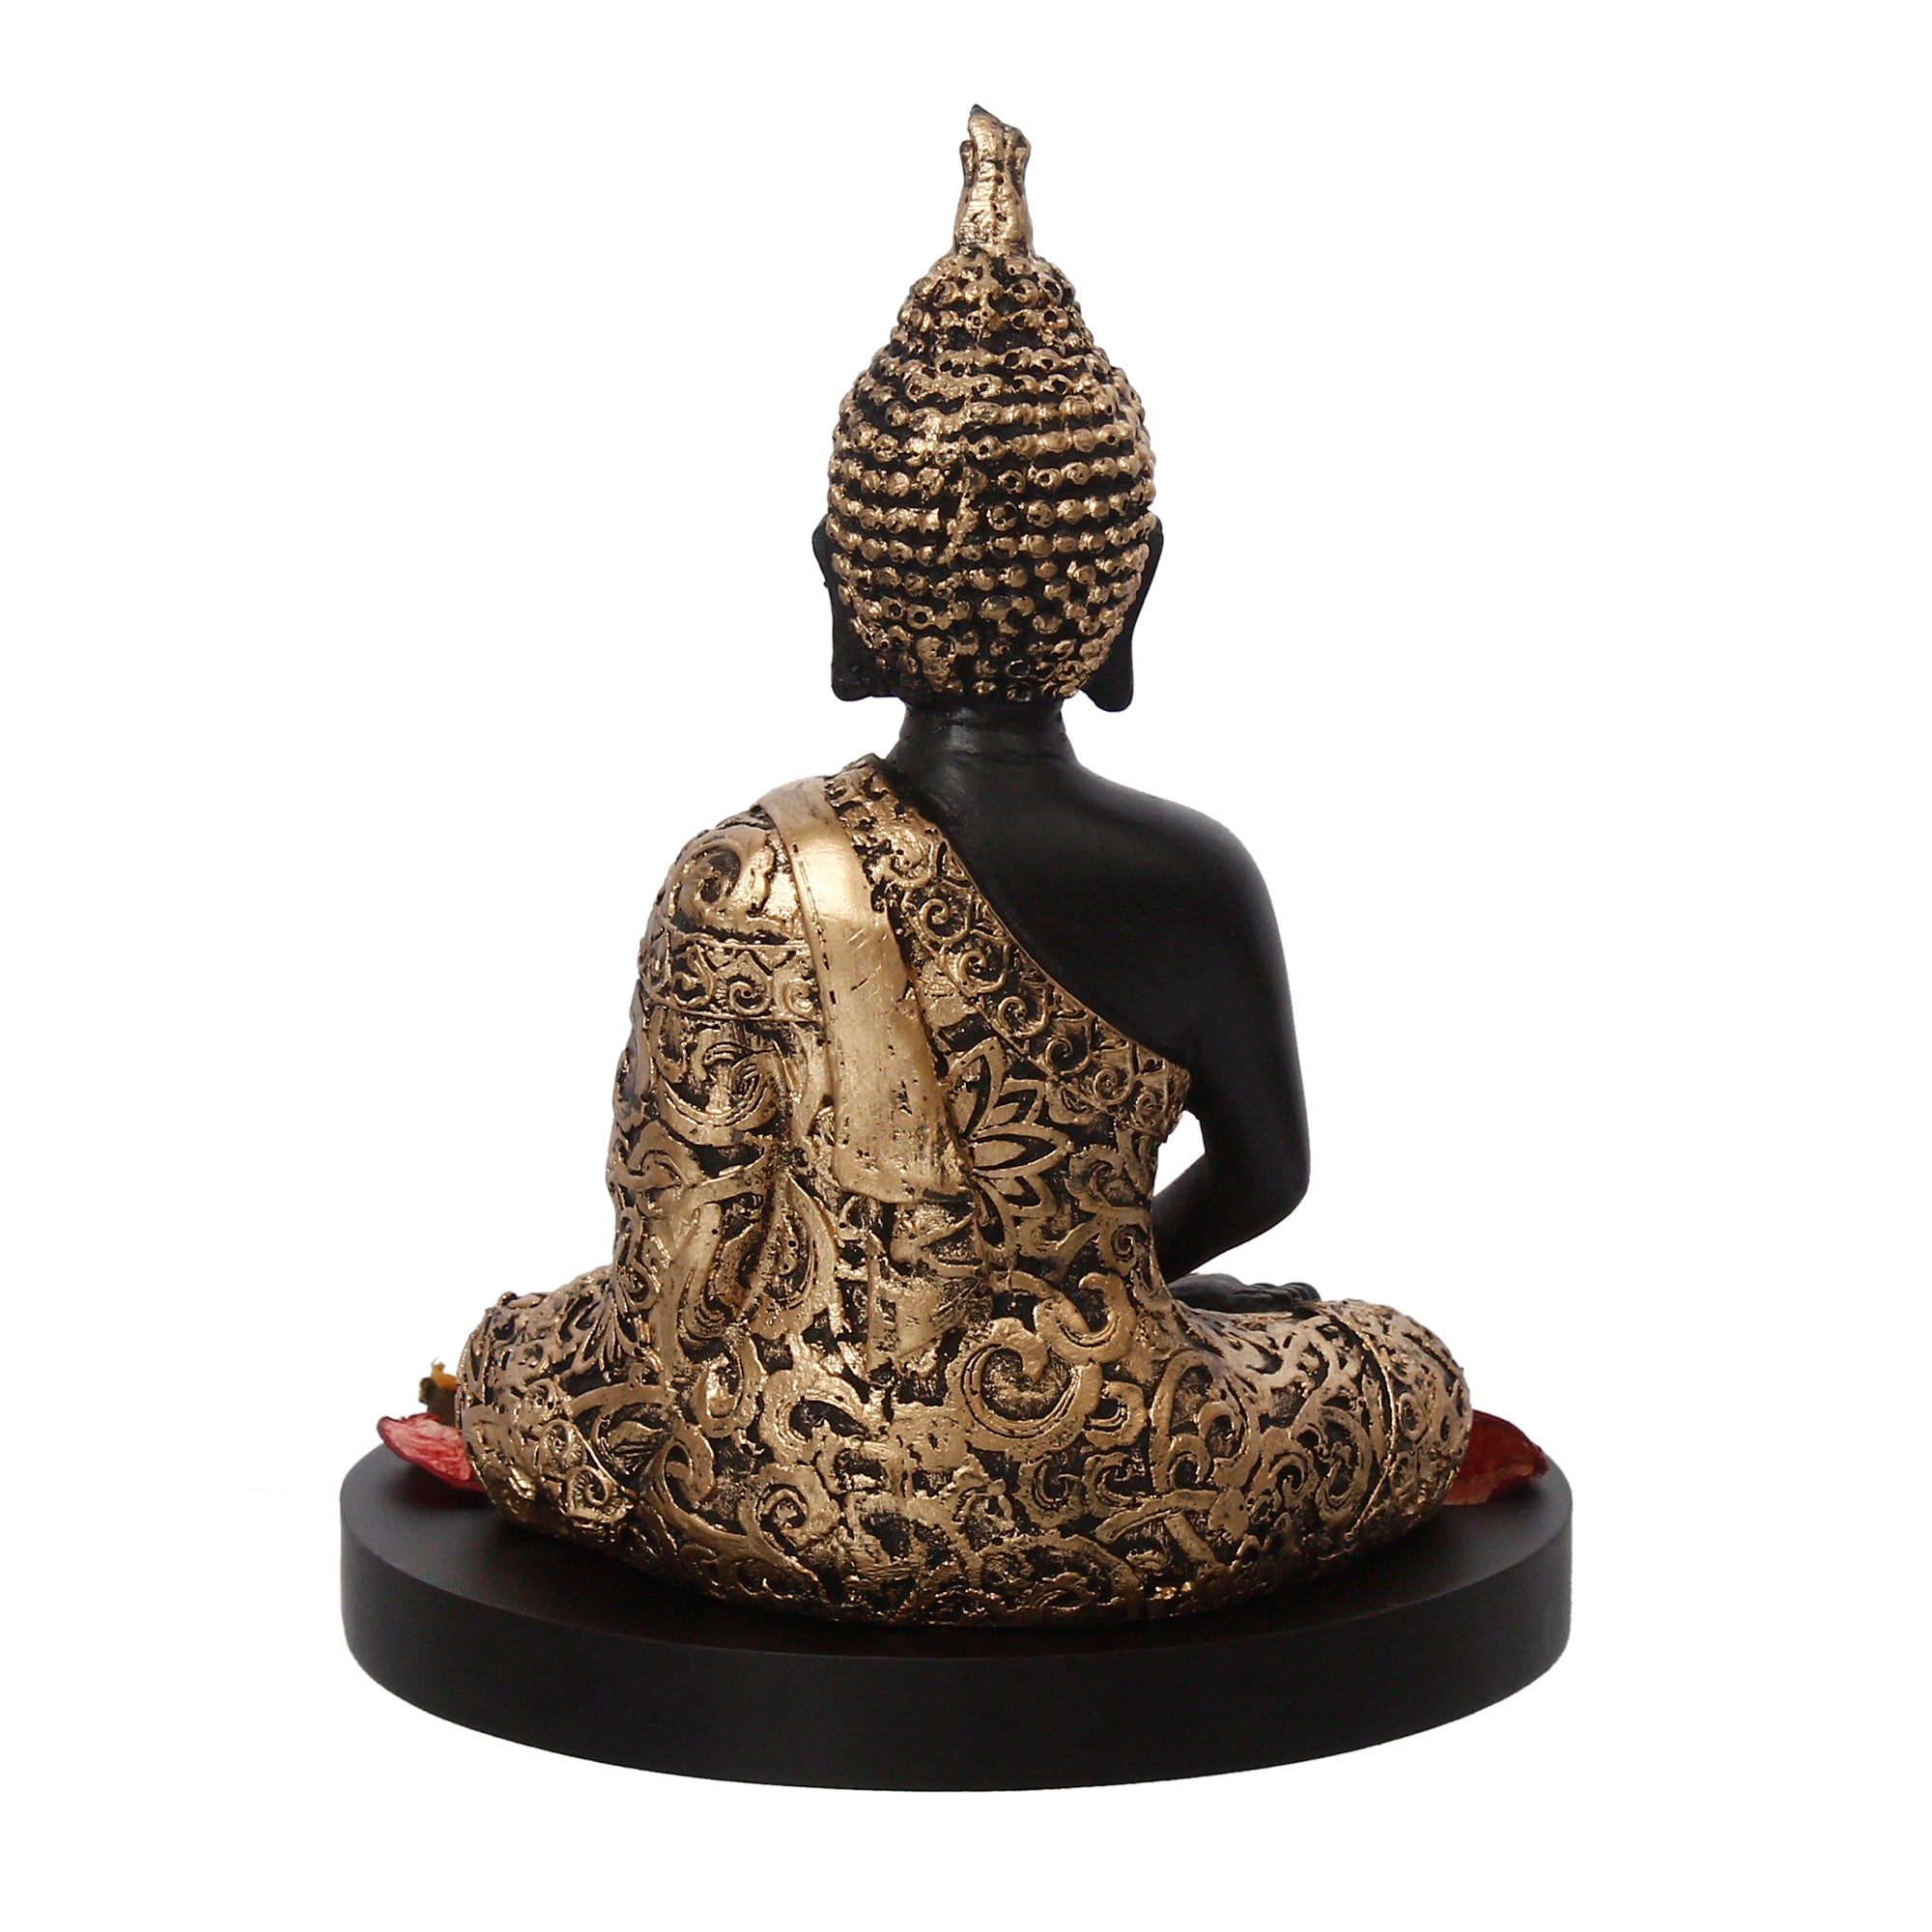 Handcrafted Meditating Golden Buddha Statue with Wooden Base, Fragranced Petals and Tealight 6